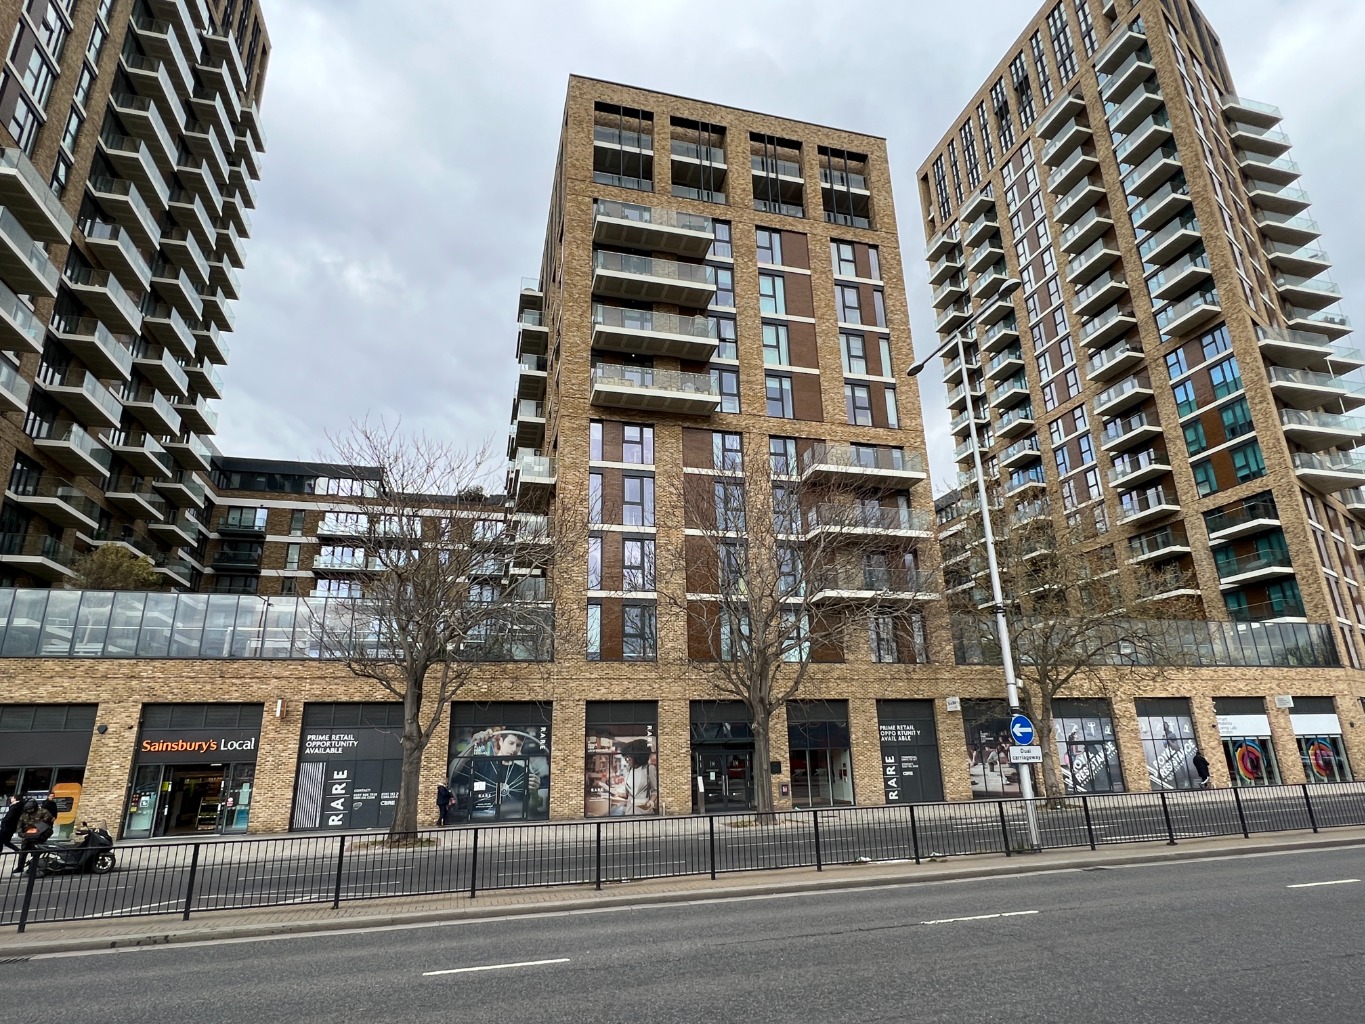 Beaumont Gibbs are delighted to offer this stunning one bedroom 4th floor balcony apartment for sale. The property forms part of the Royal Arsenal Riverside development, with its landscaped grounds which are full of the rich history of this beautiful site.